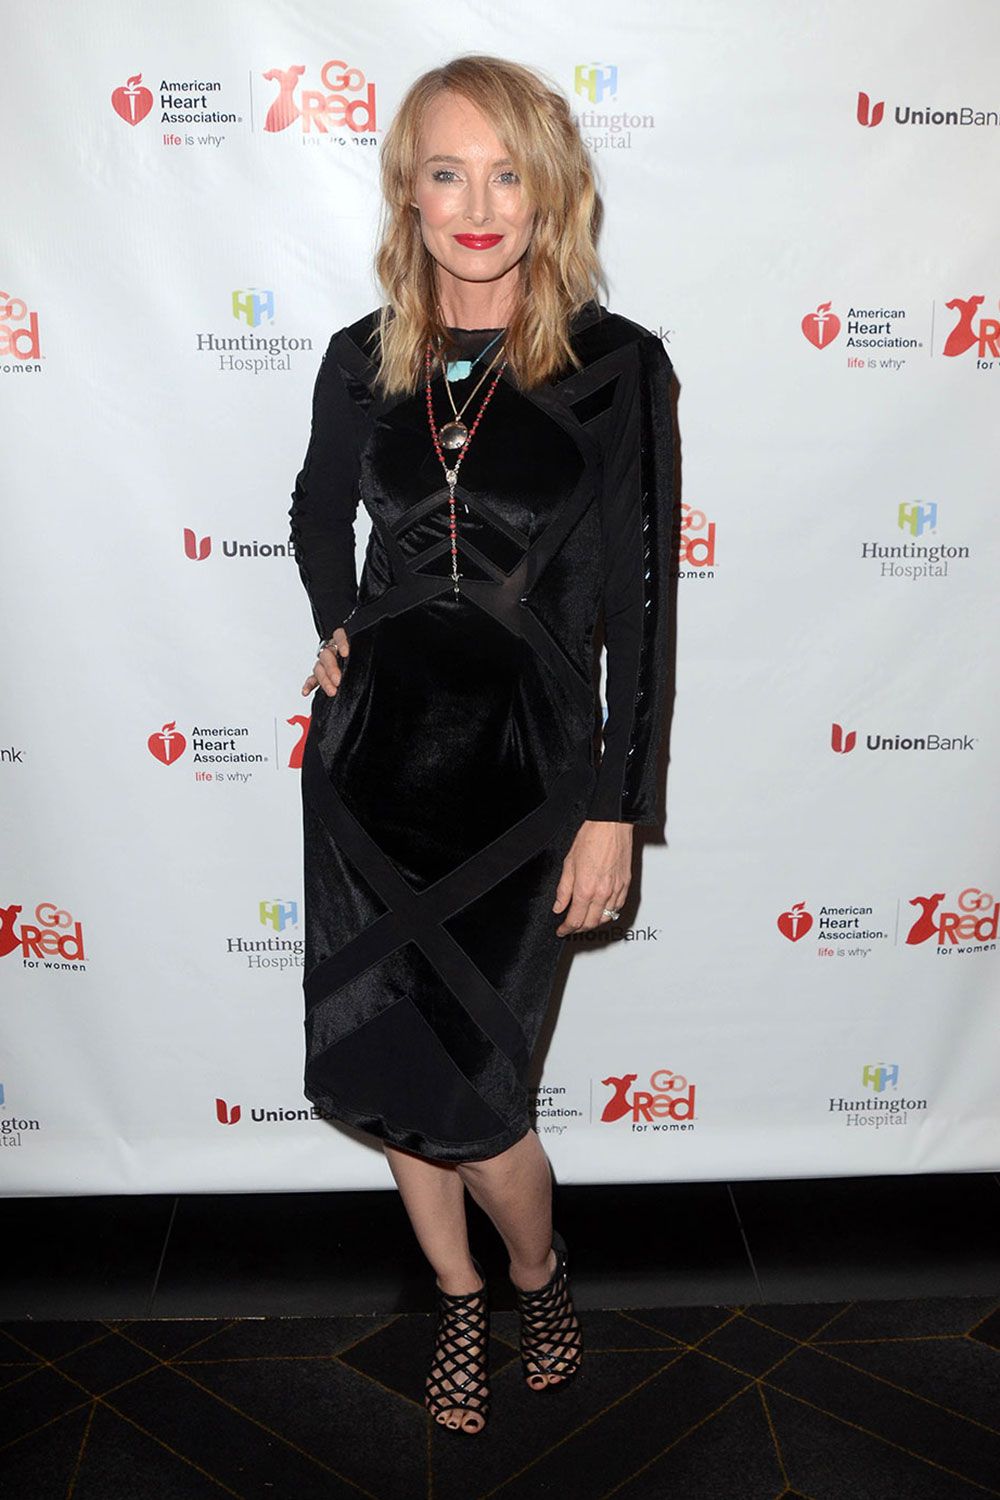 Mandatory Credit: Photo by Mediapunch/Shutterstock (9682789d) Chynna Phillips 3rd Annual Rock The Red Music Benefit, Los Angeles, USA - 17 May 2018